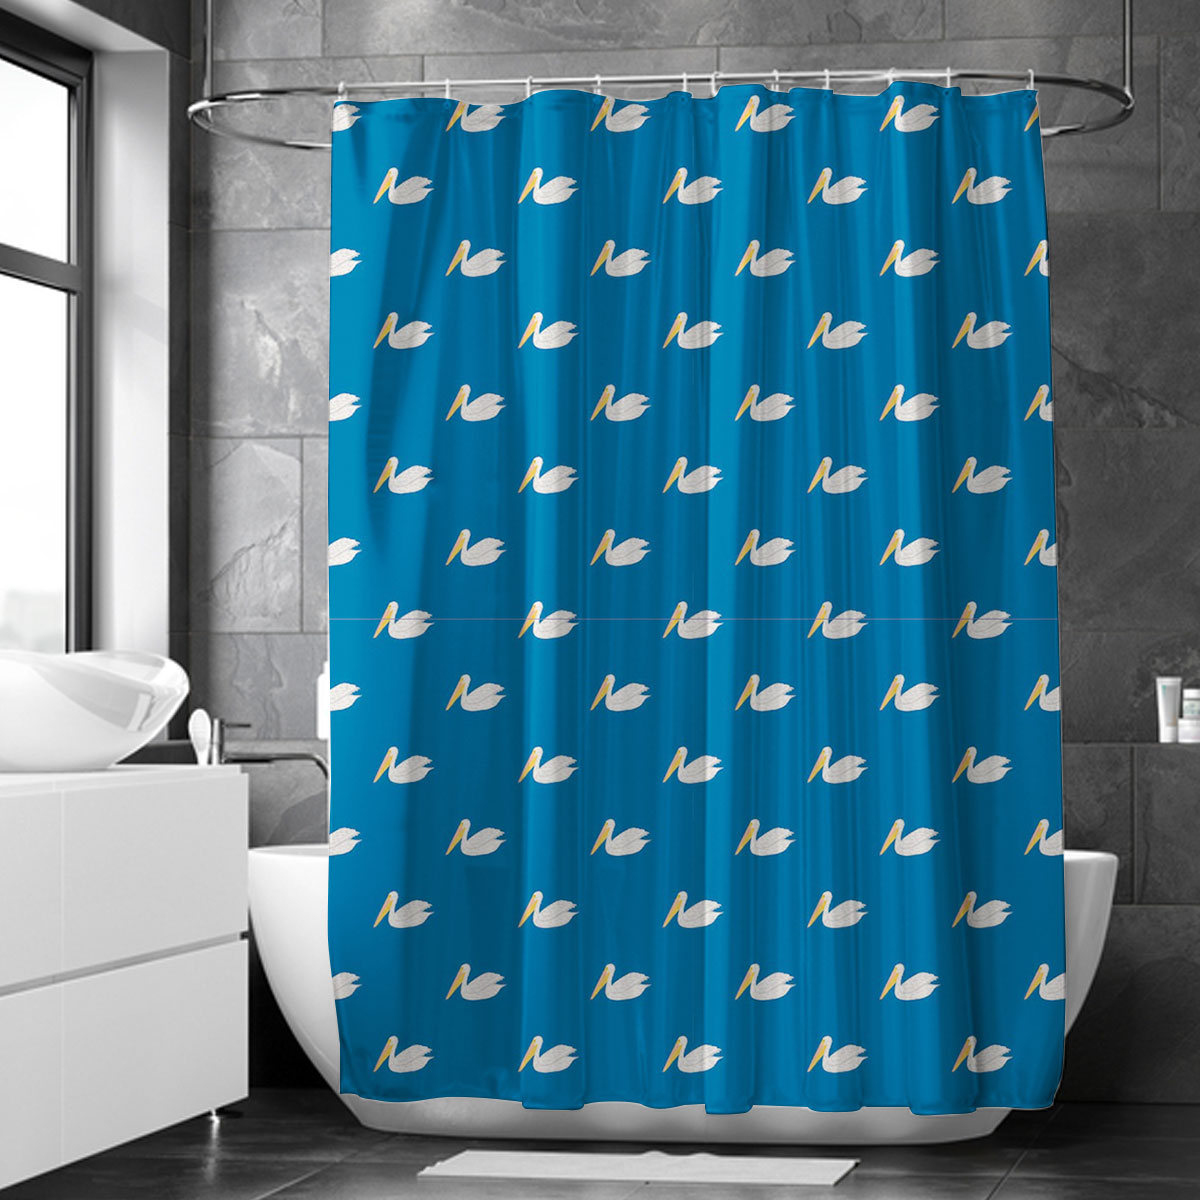 Pelican On Water Shower Curtain